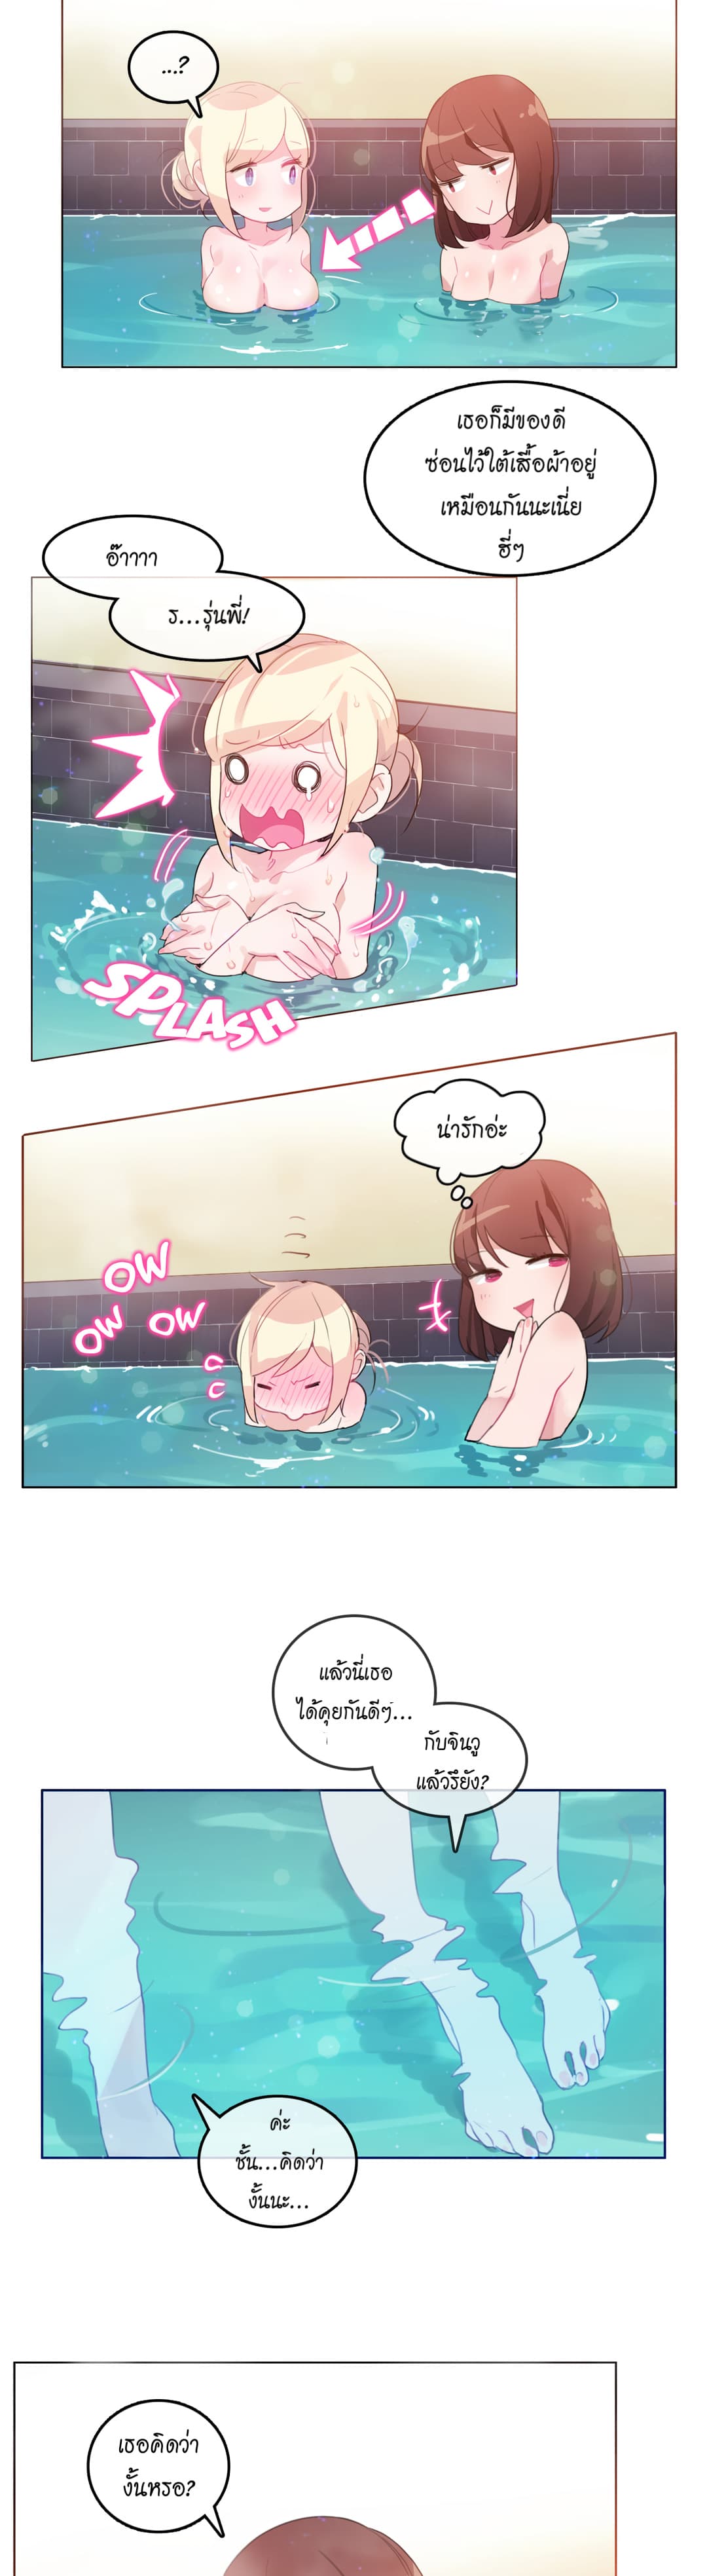 A Pervert’s Daily Life 12 (7)